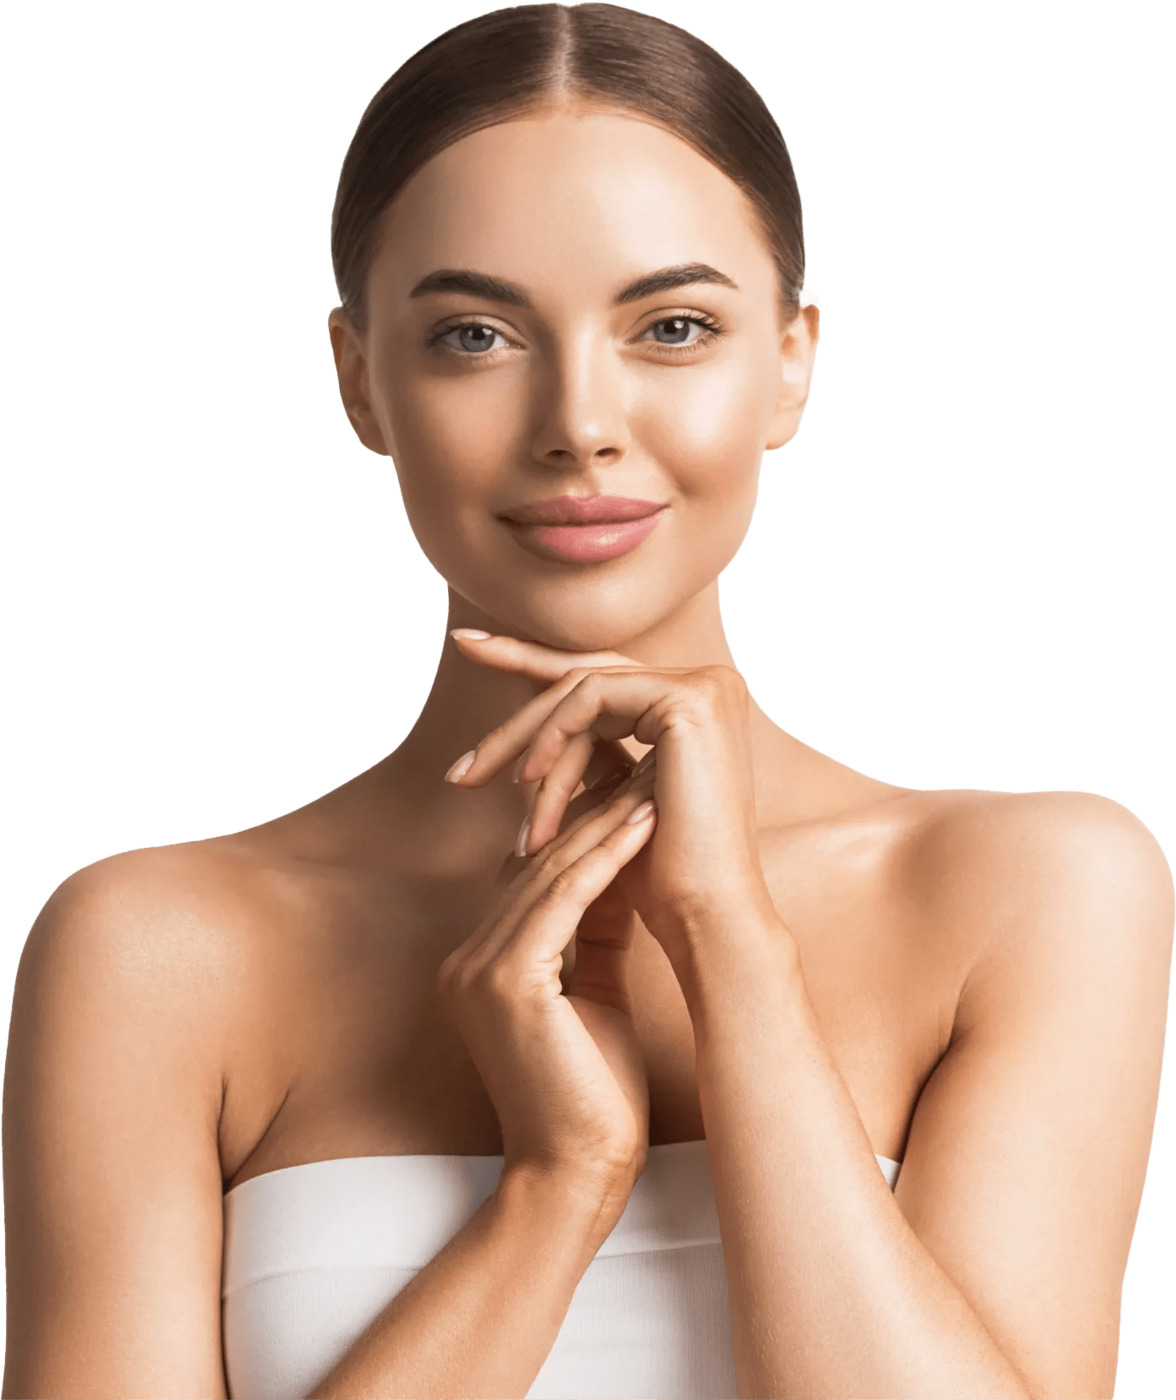 Essential Spa is one of the most reputable skincare clinics in and around Sylvania, OH. The clinic has an experienced team of experts to address all the skincare issues.